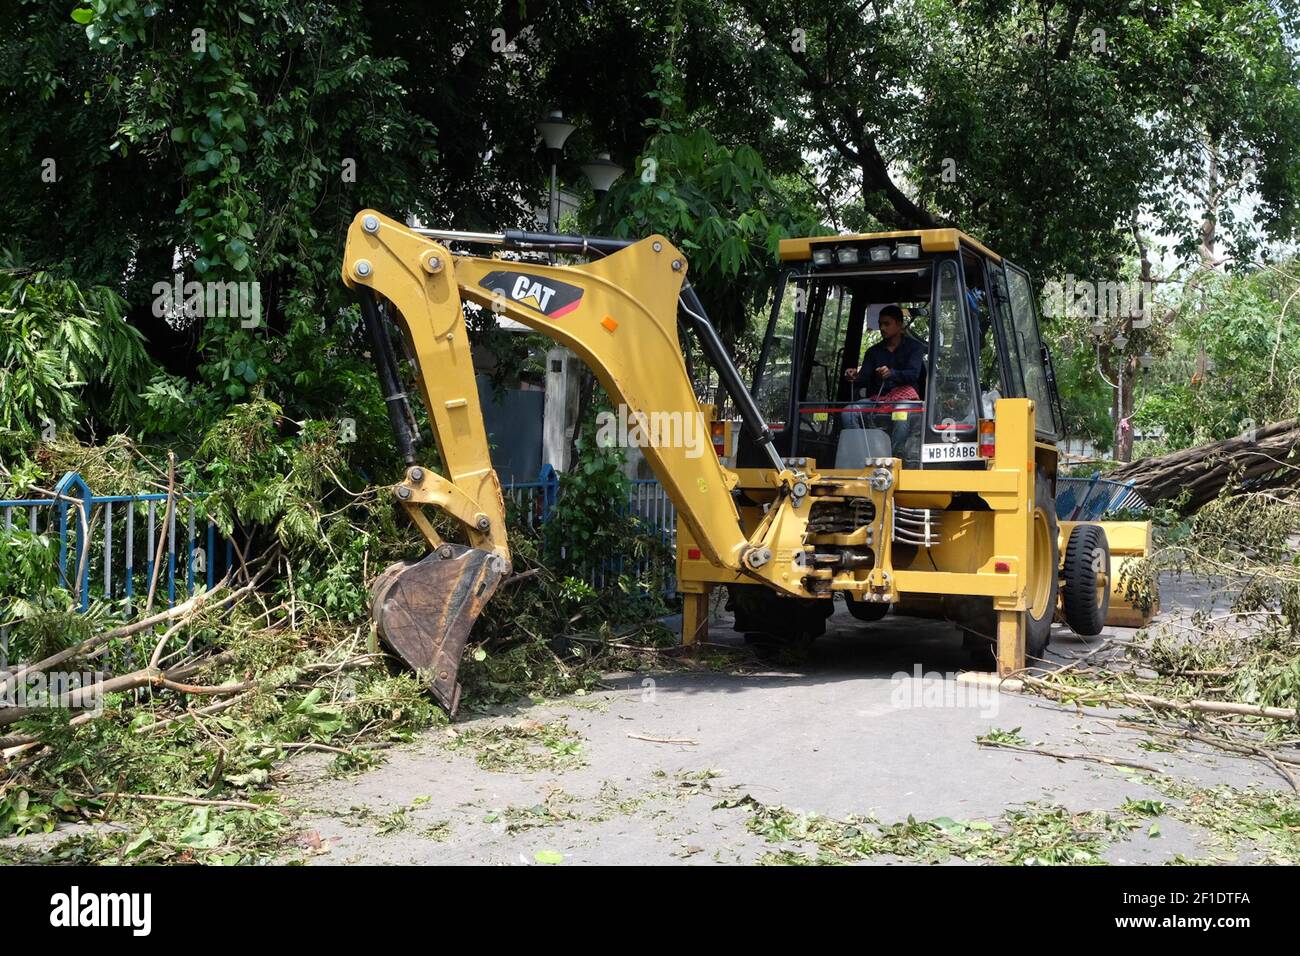 KMC workers have used a bulldozer to clear the uprooted trees over the road in Kolkata, the state capital, authorities struggled to remove debris from roads and clear trees that fell as the cyclone, packing winds of 133 km (83 miles) per hour, pounded the city of 14 million for hours. (Photo by Satyajit Shaw/Pacific Press/Sipa USA) Stock Photo